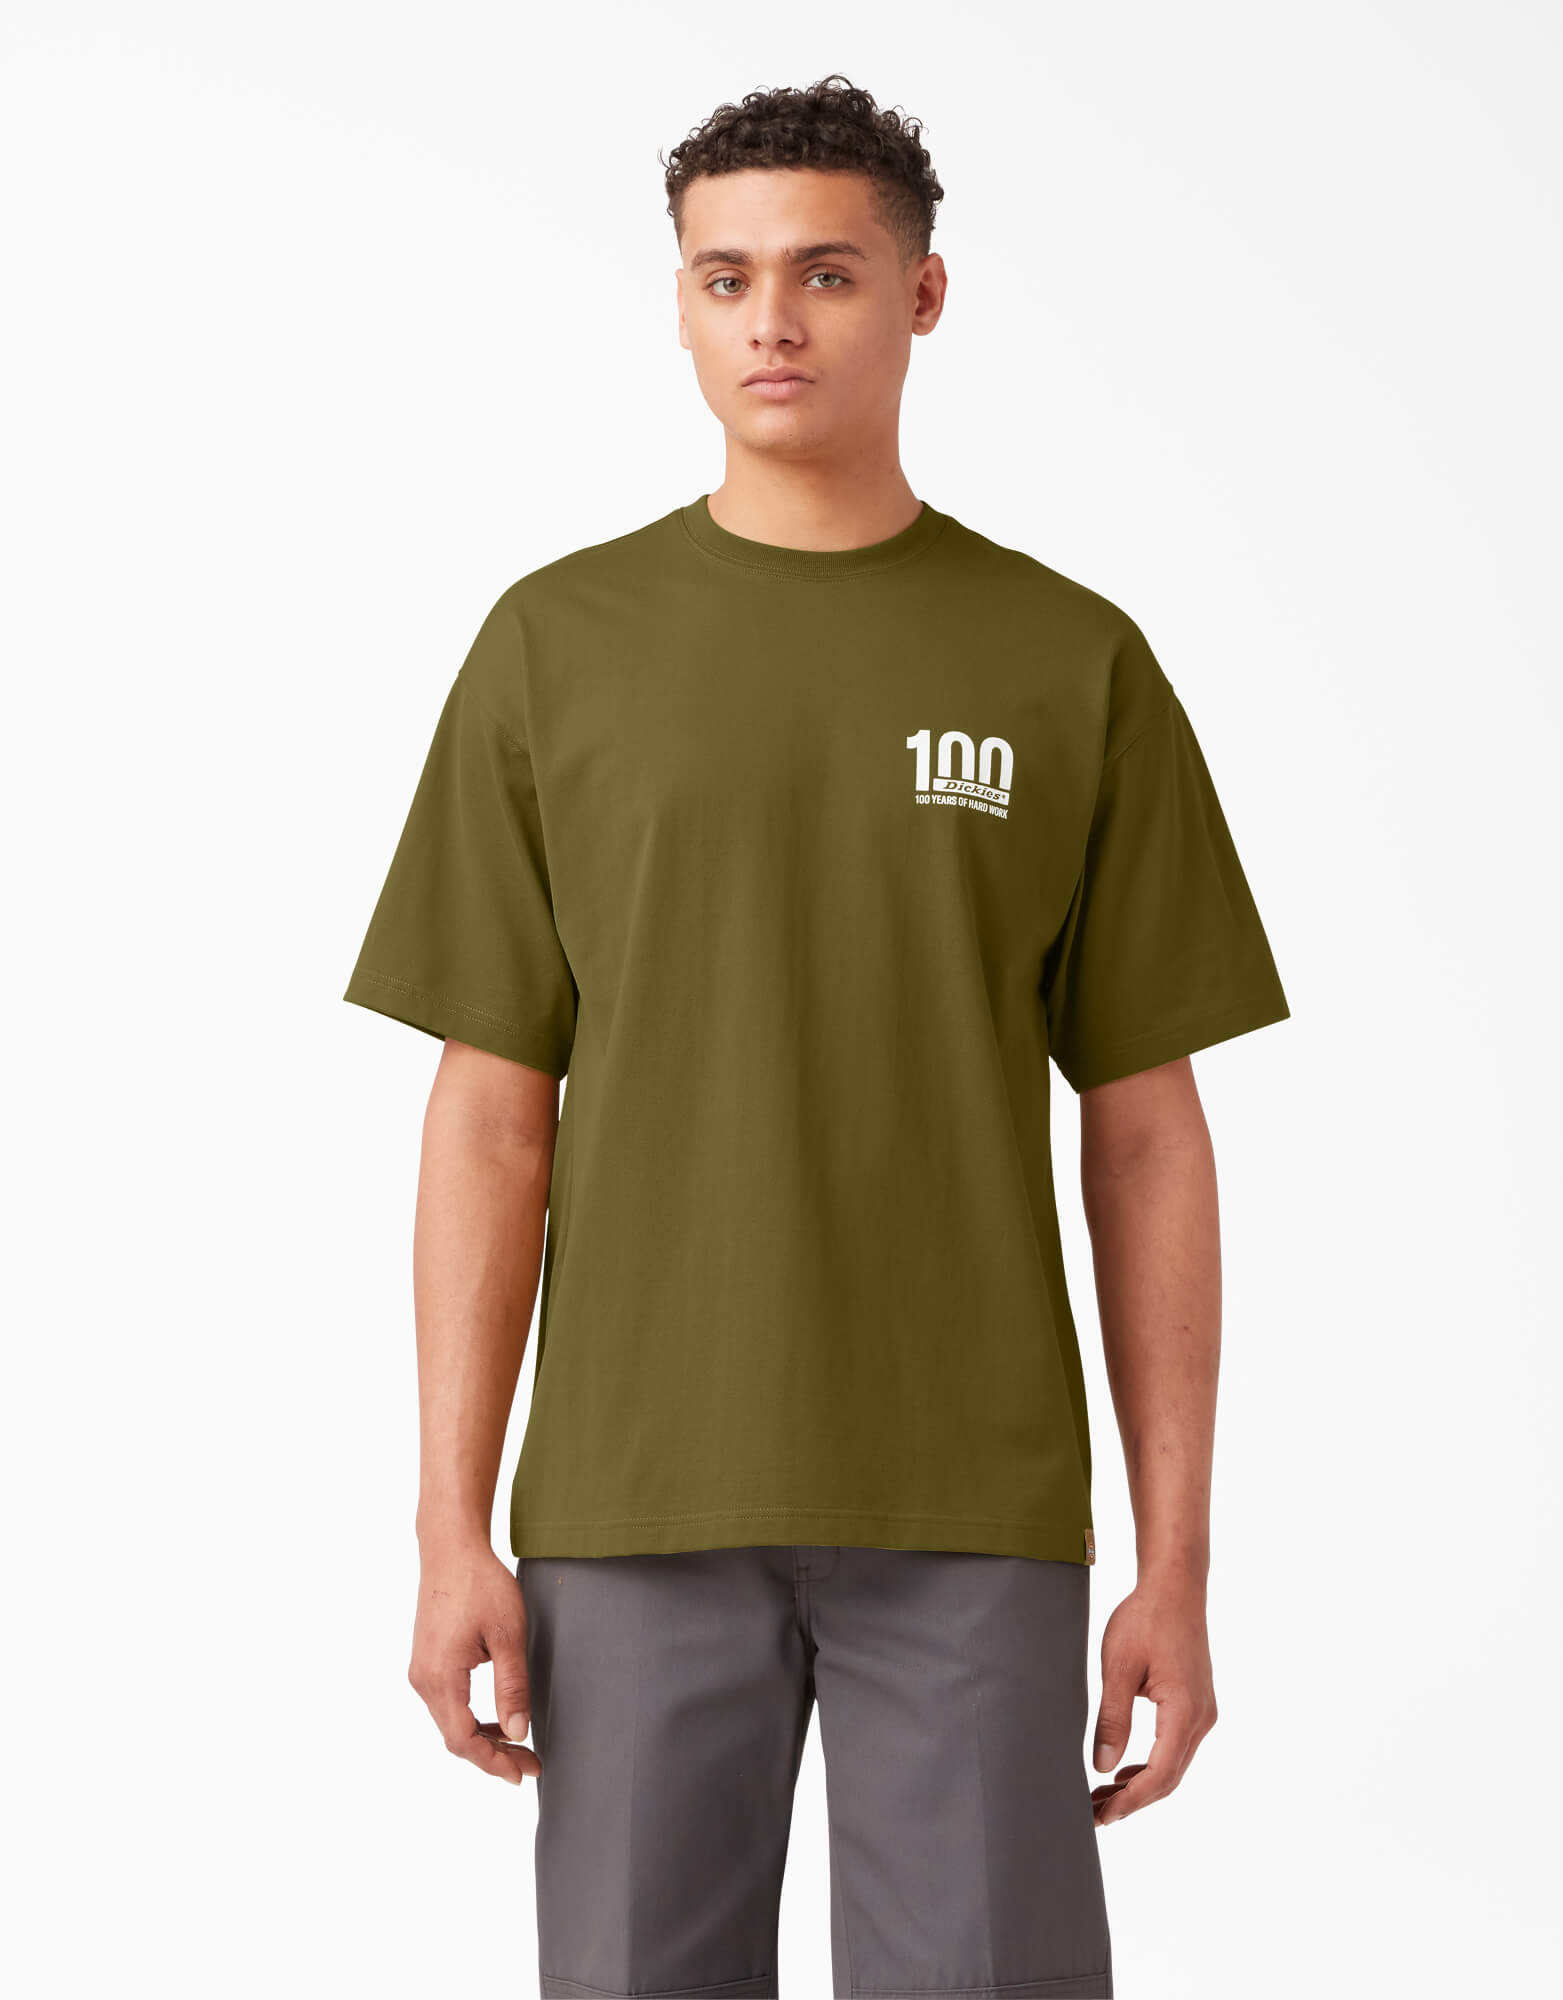 100 Year Short Sleeve Relaxed Fit Graphic T-Shirt